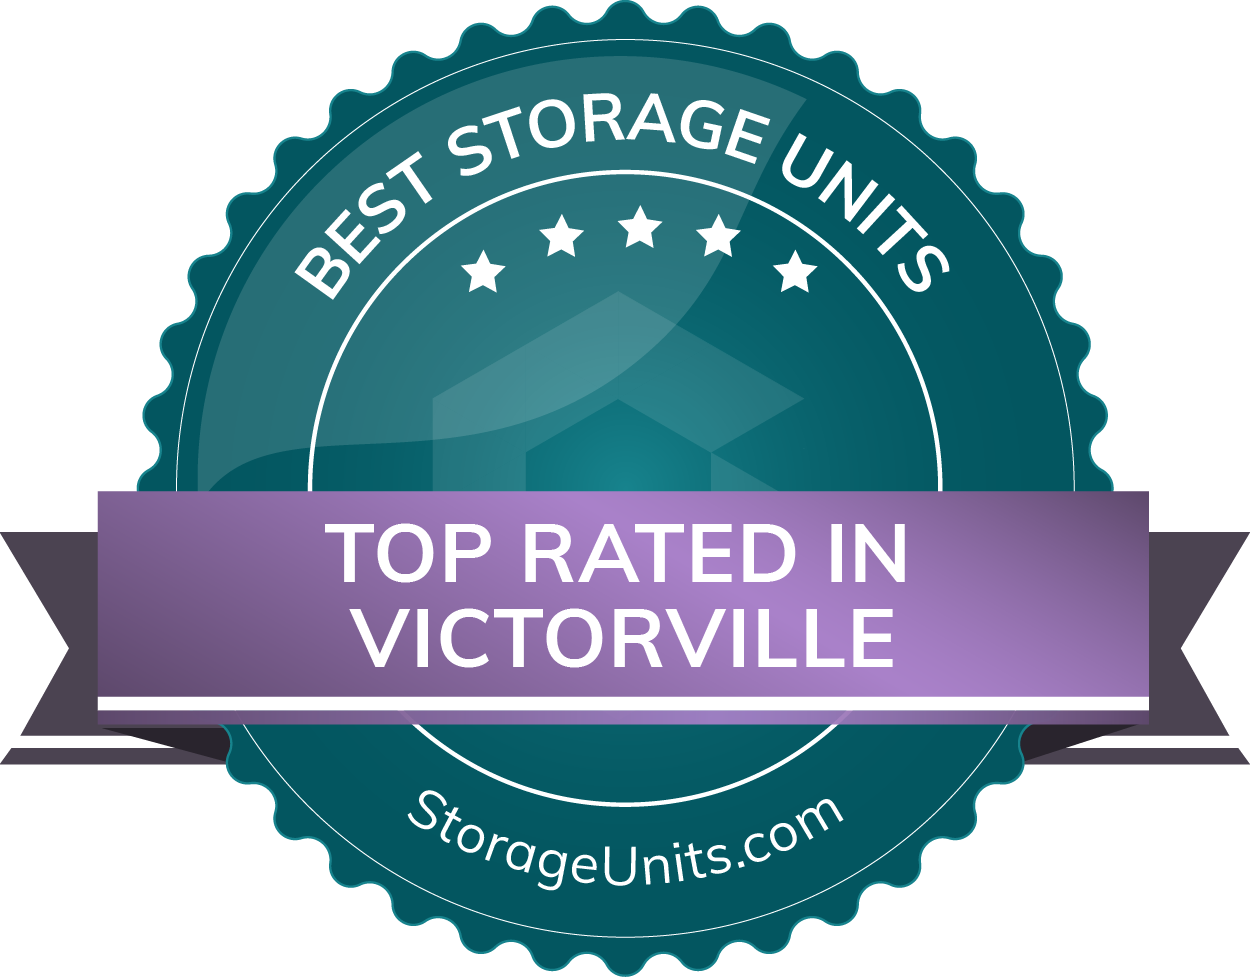 Best Self Storage Units in Victorville, California of 2022